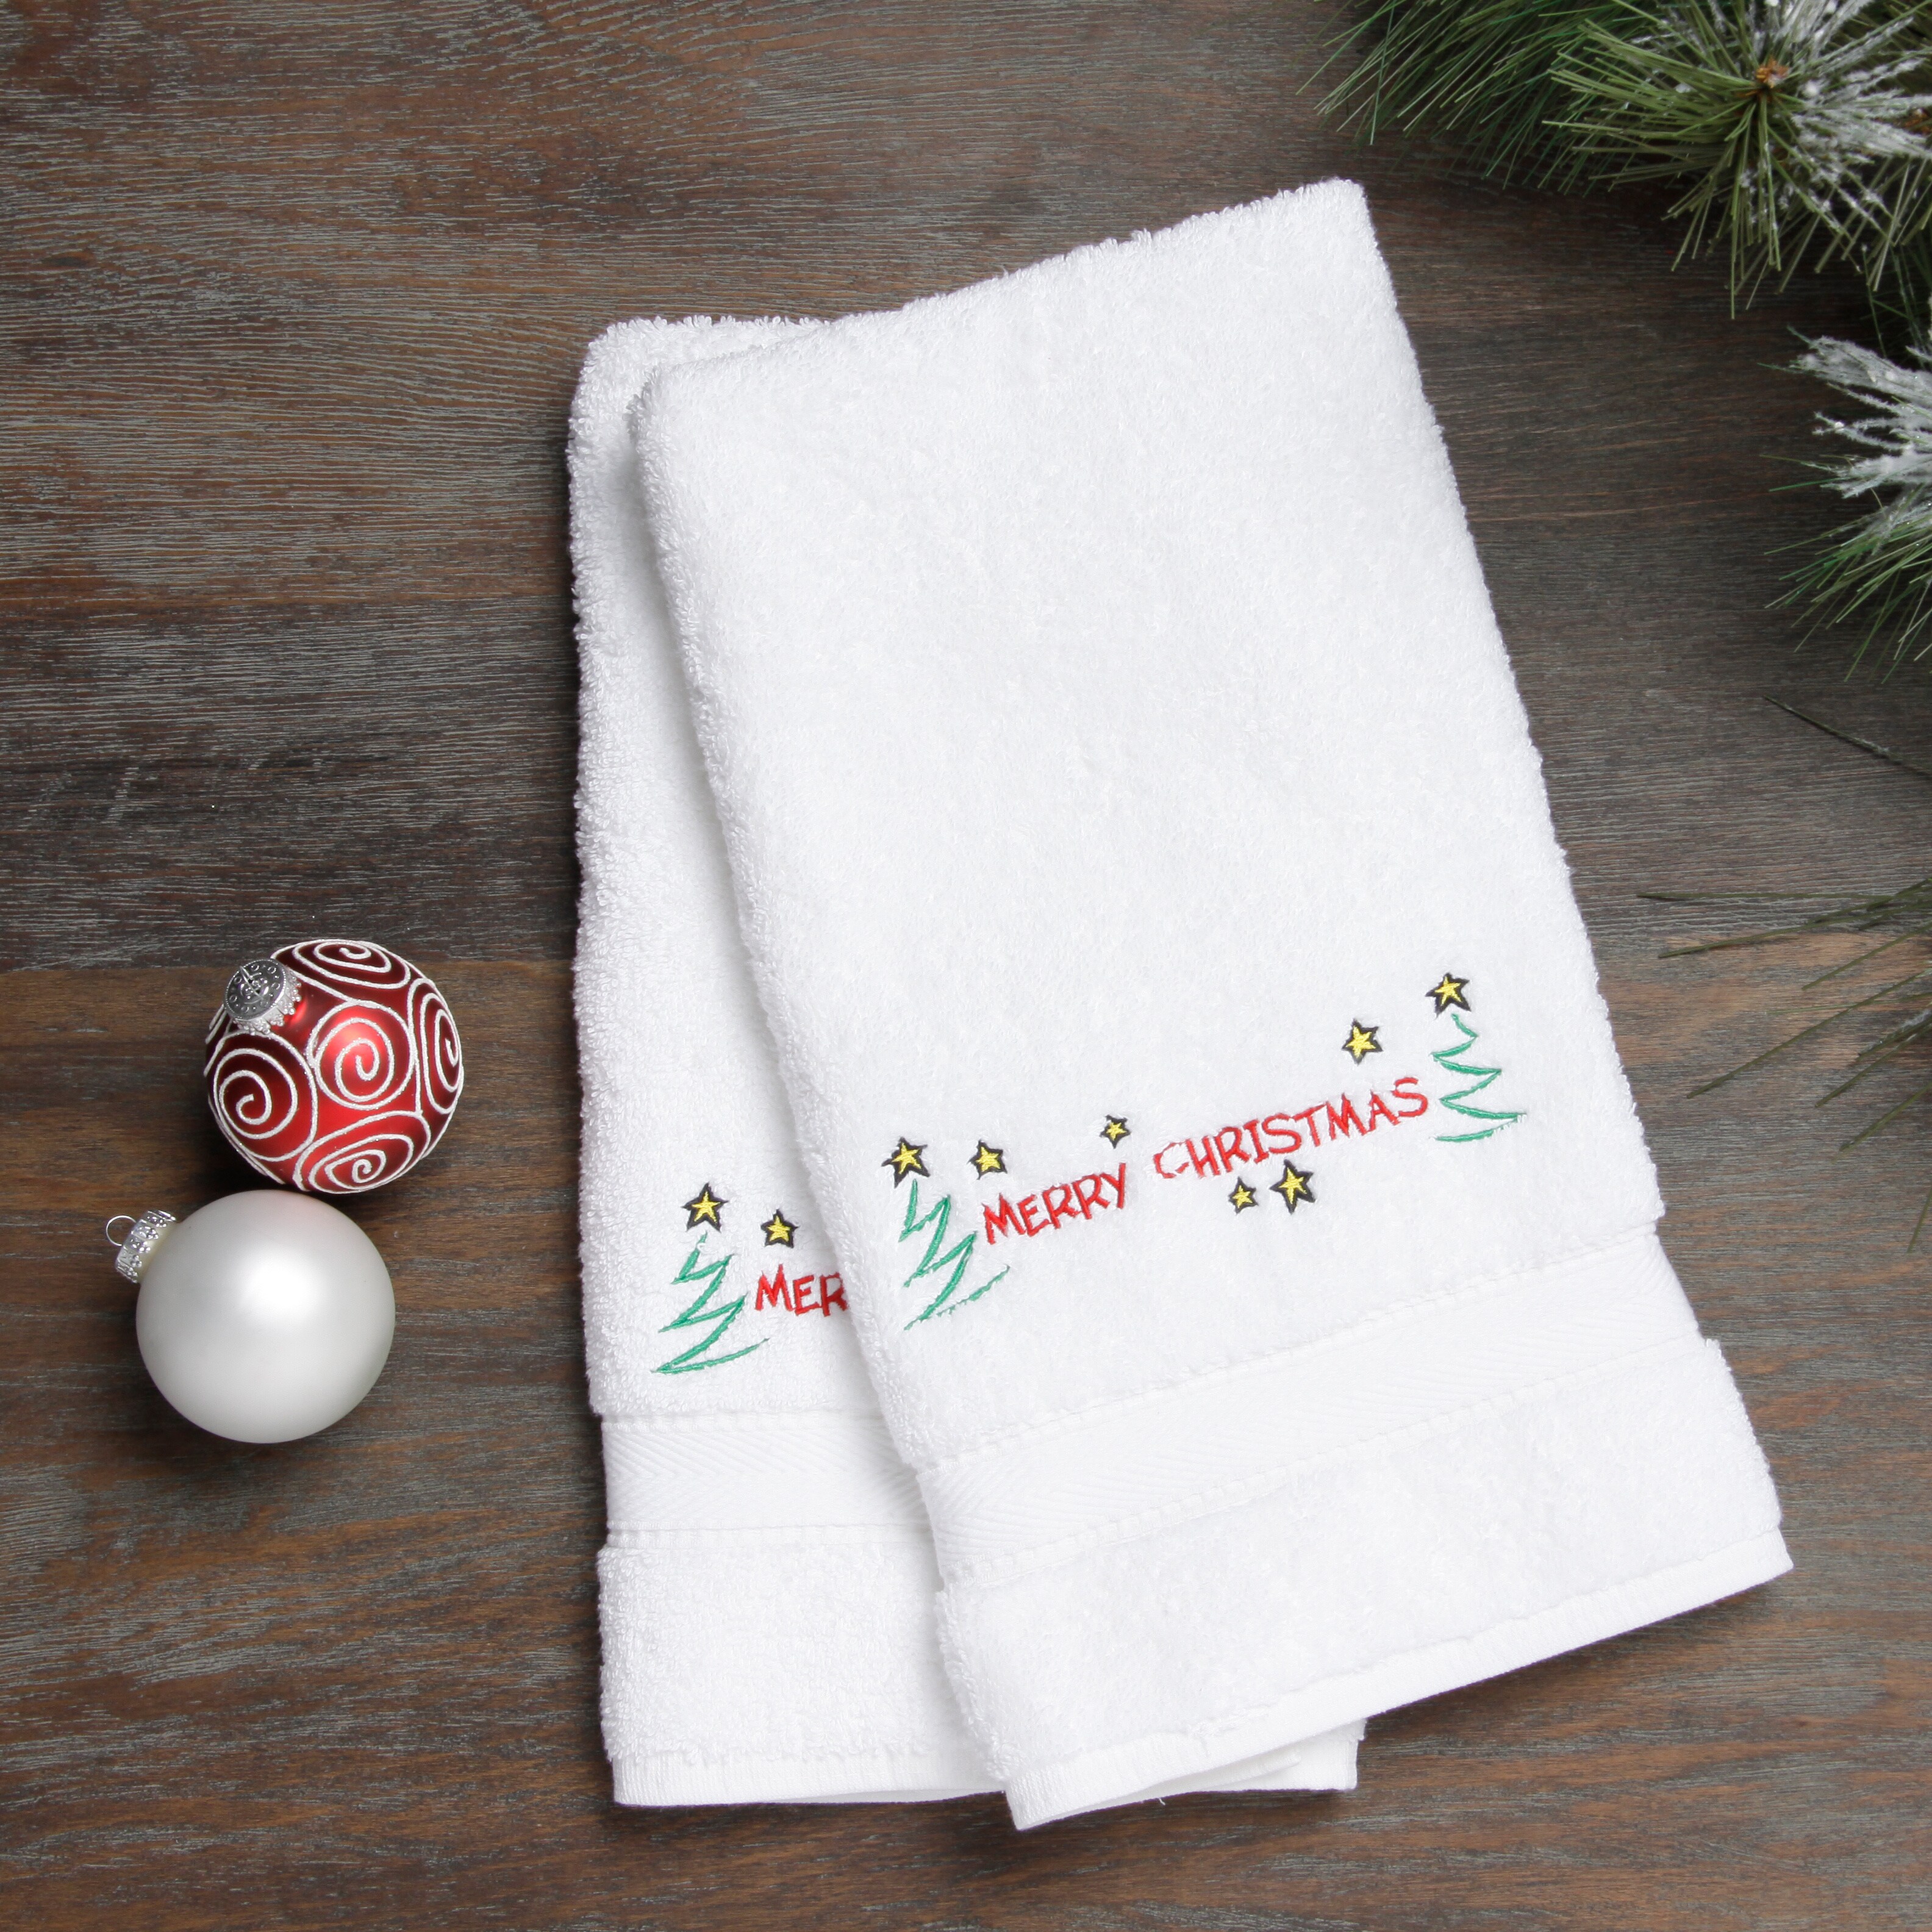 Floral Wreath Embroidered Luxury Cotton Hand Towel